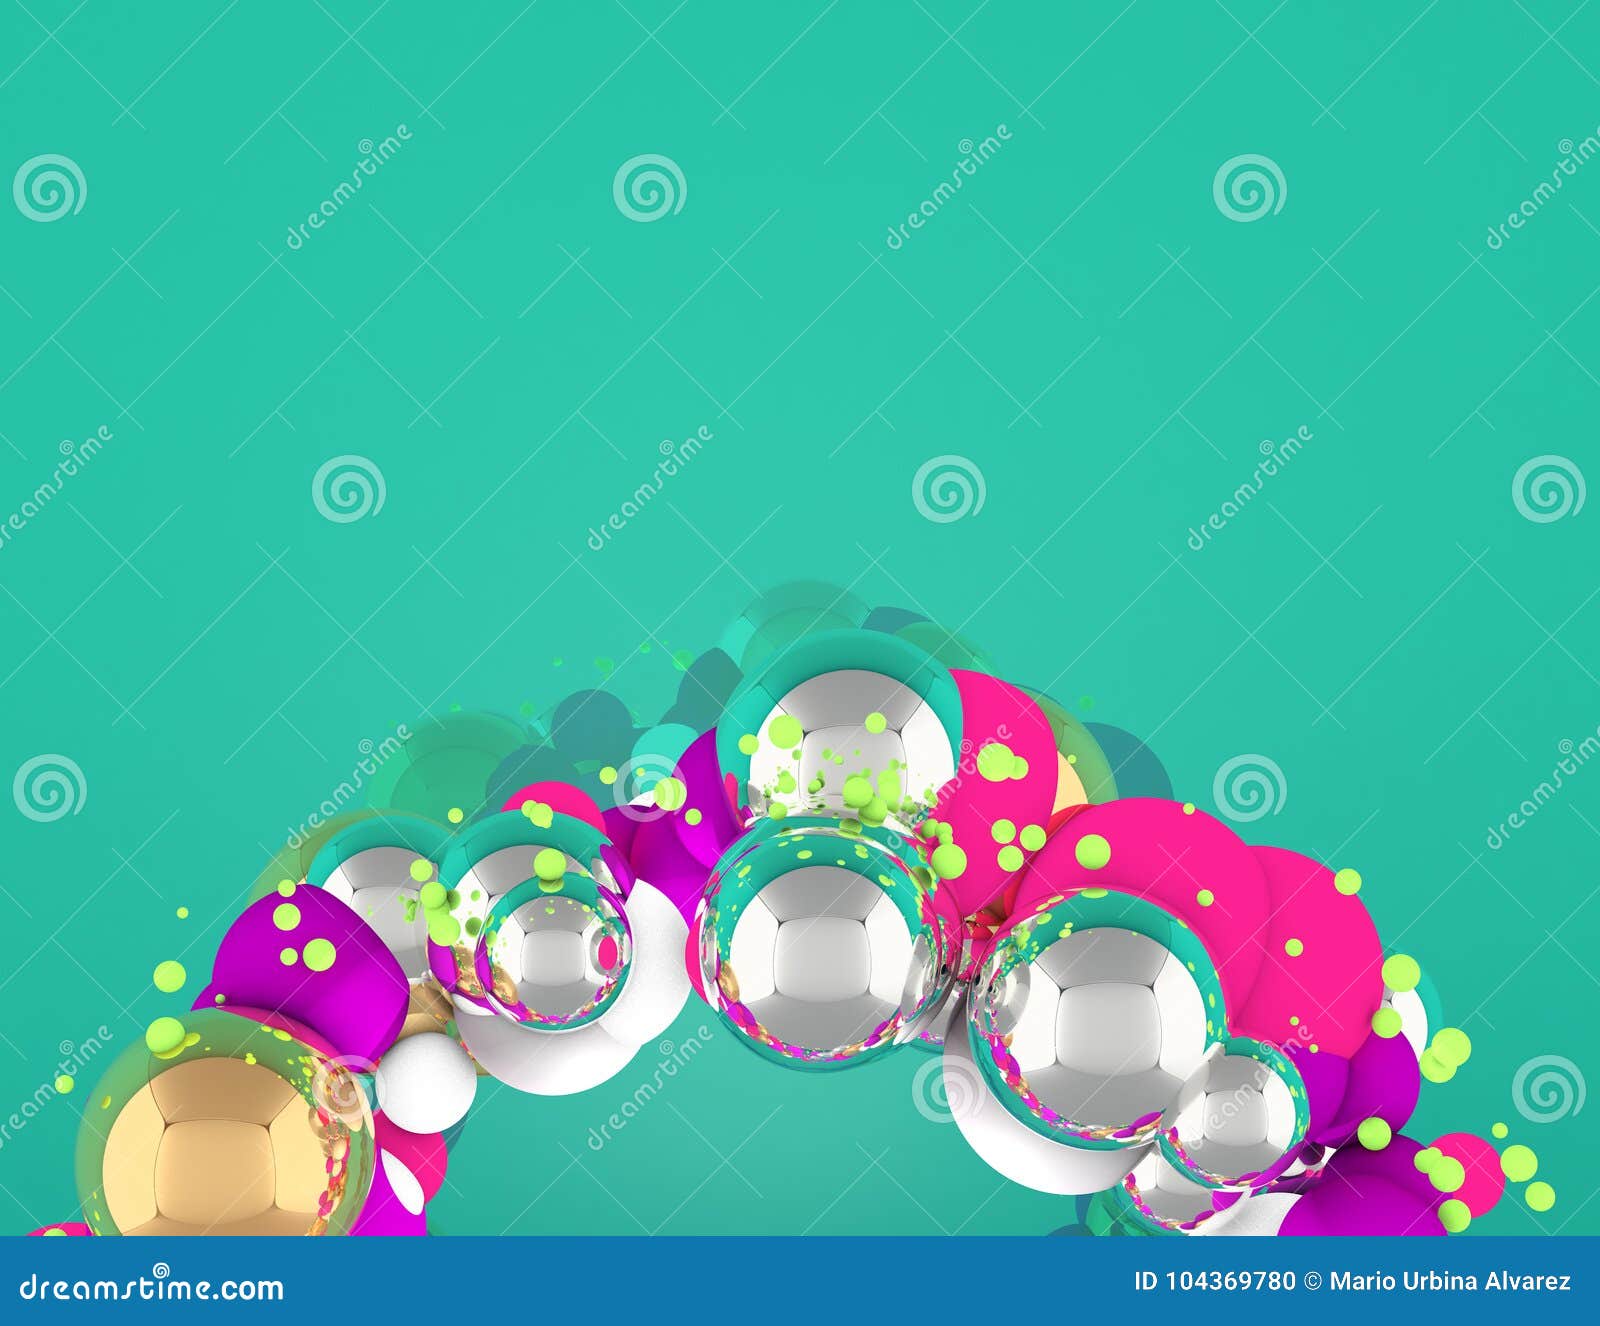 christmas wreath with spheres at bottom and green background